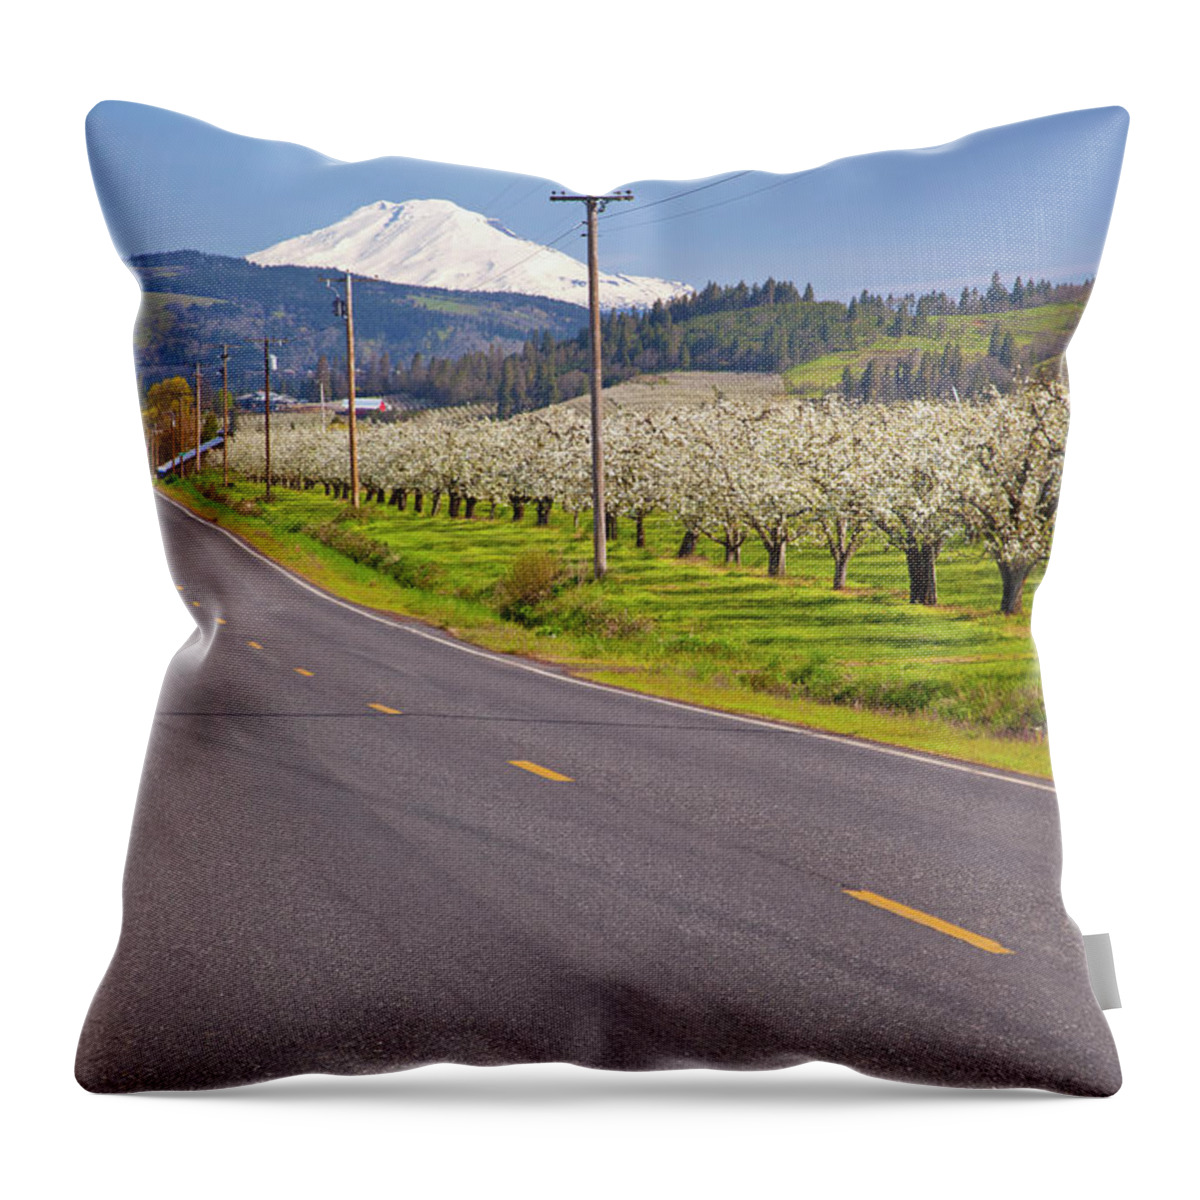 Scenics Throw Pillow featuring the photograph A Road Leading Toward Mount Hood In by Design Pics / Craig Tuttle